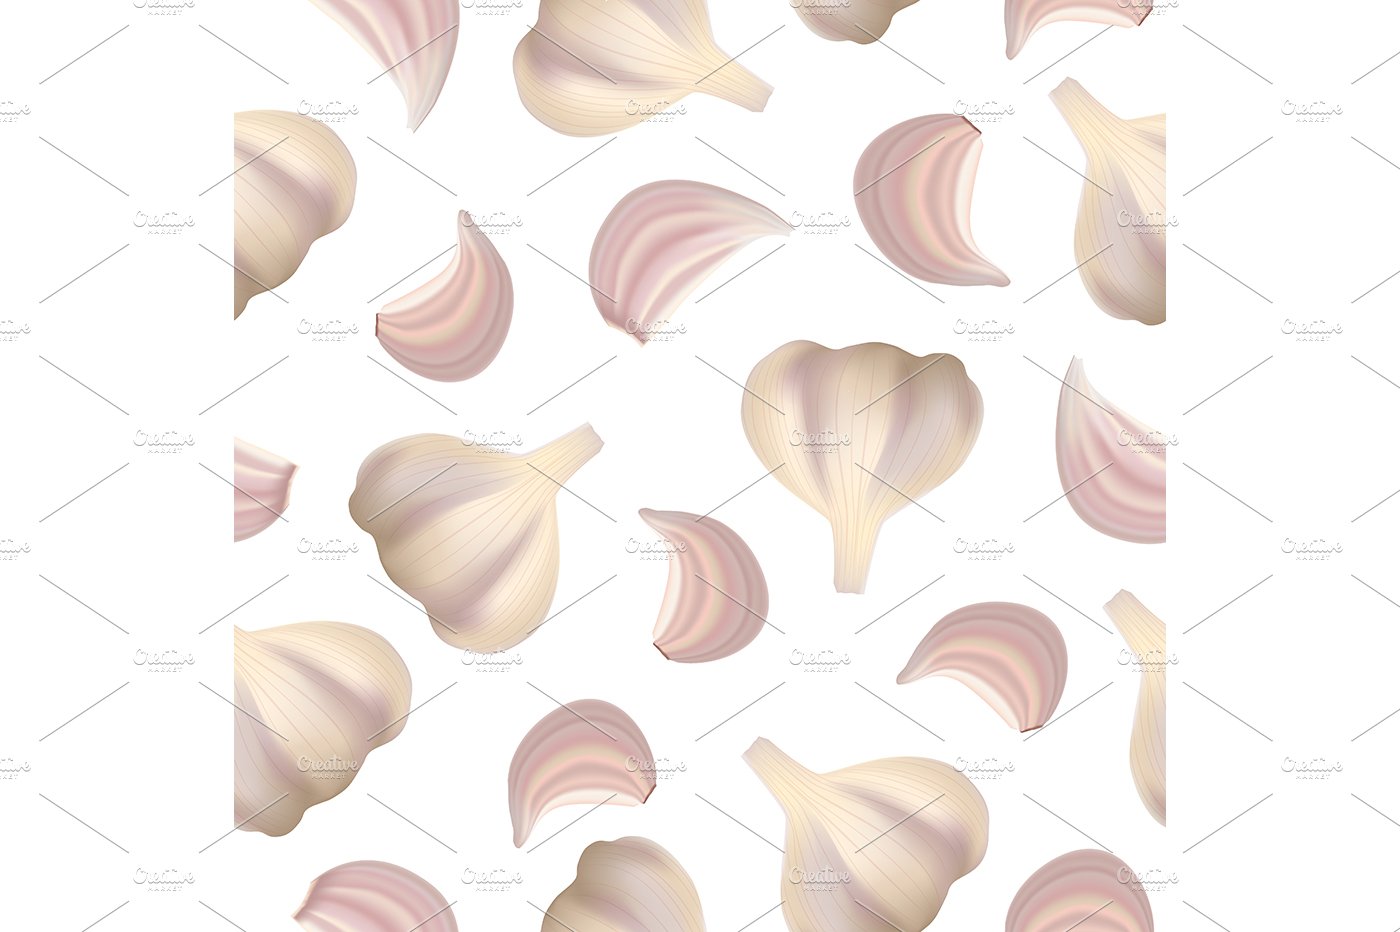 Garlic and Cloves Pattern Background cover image.